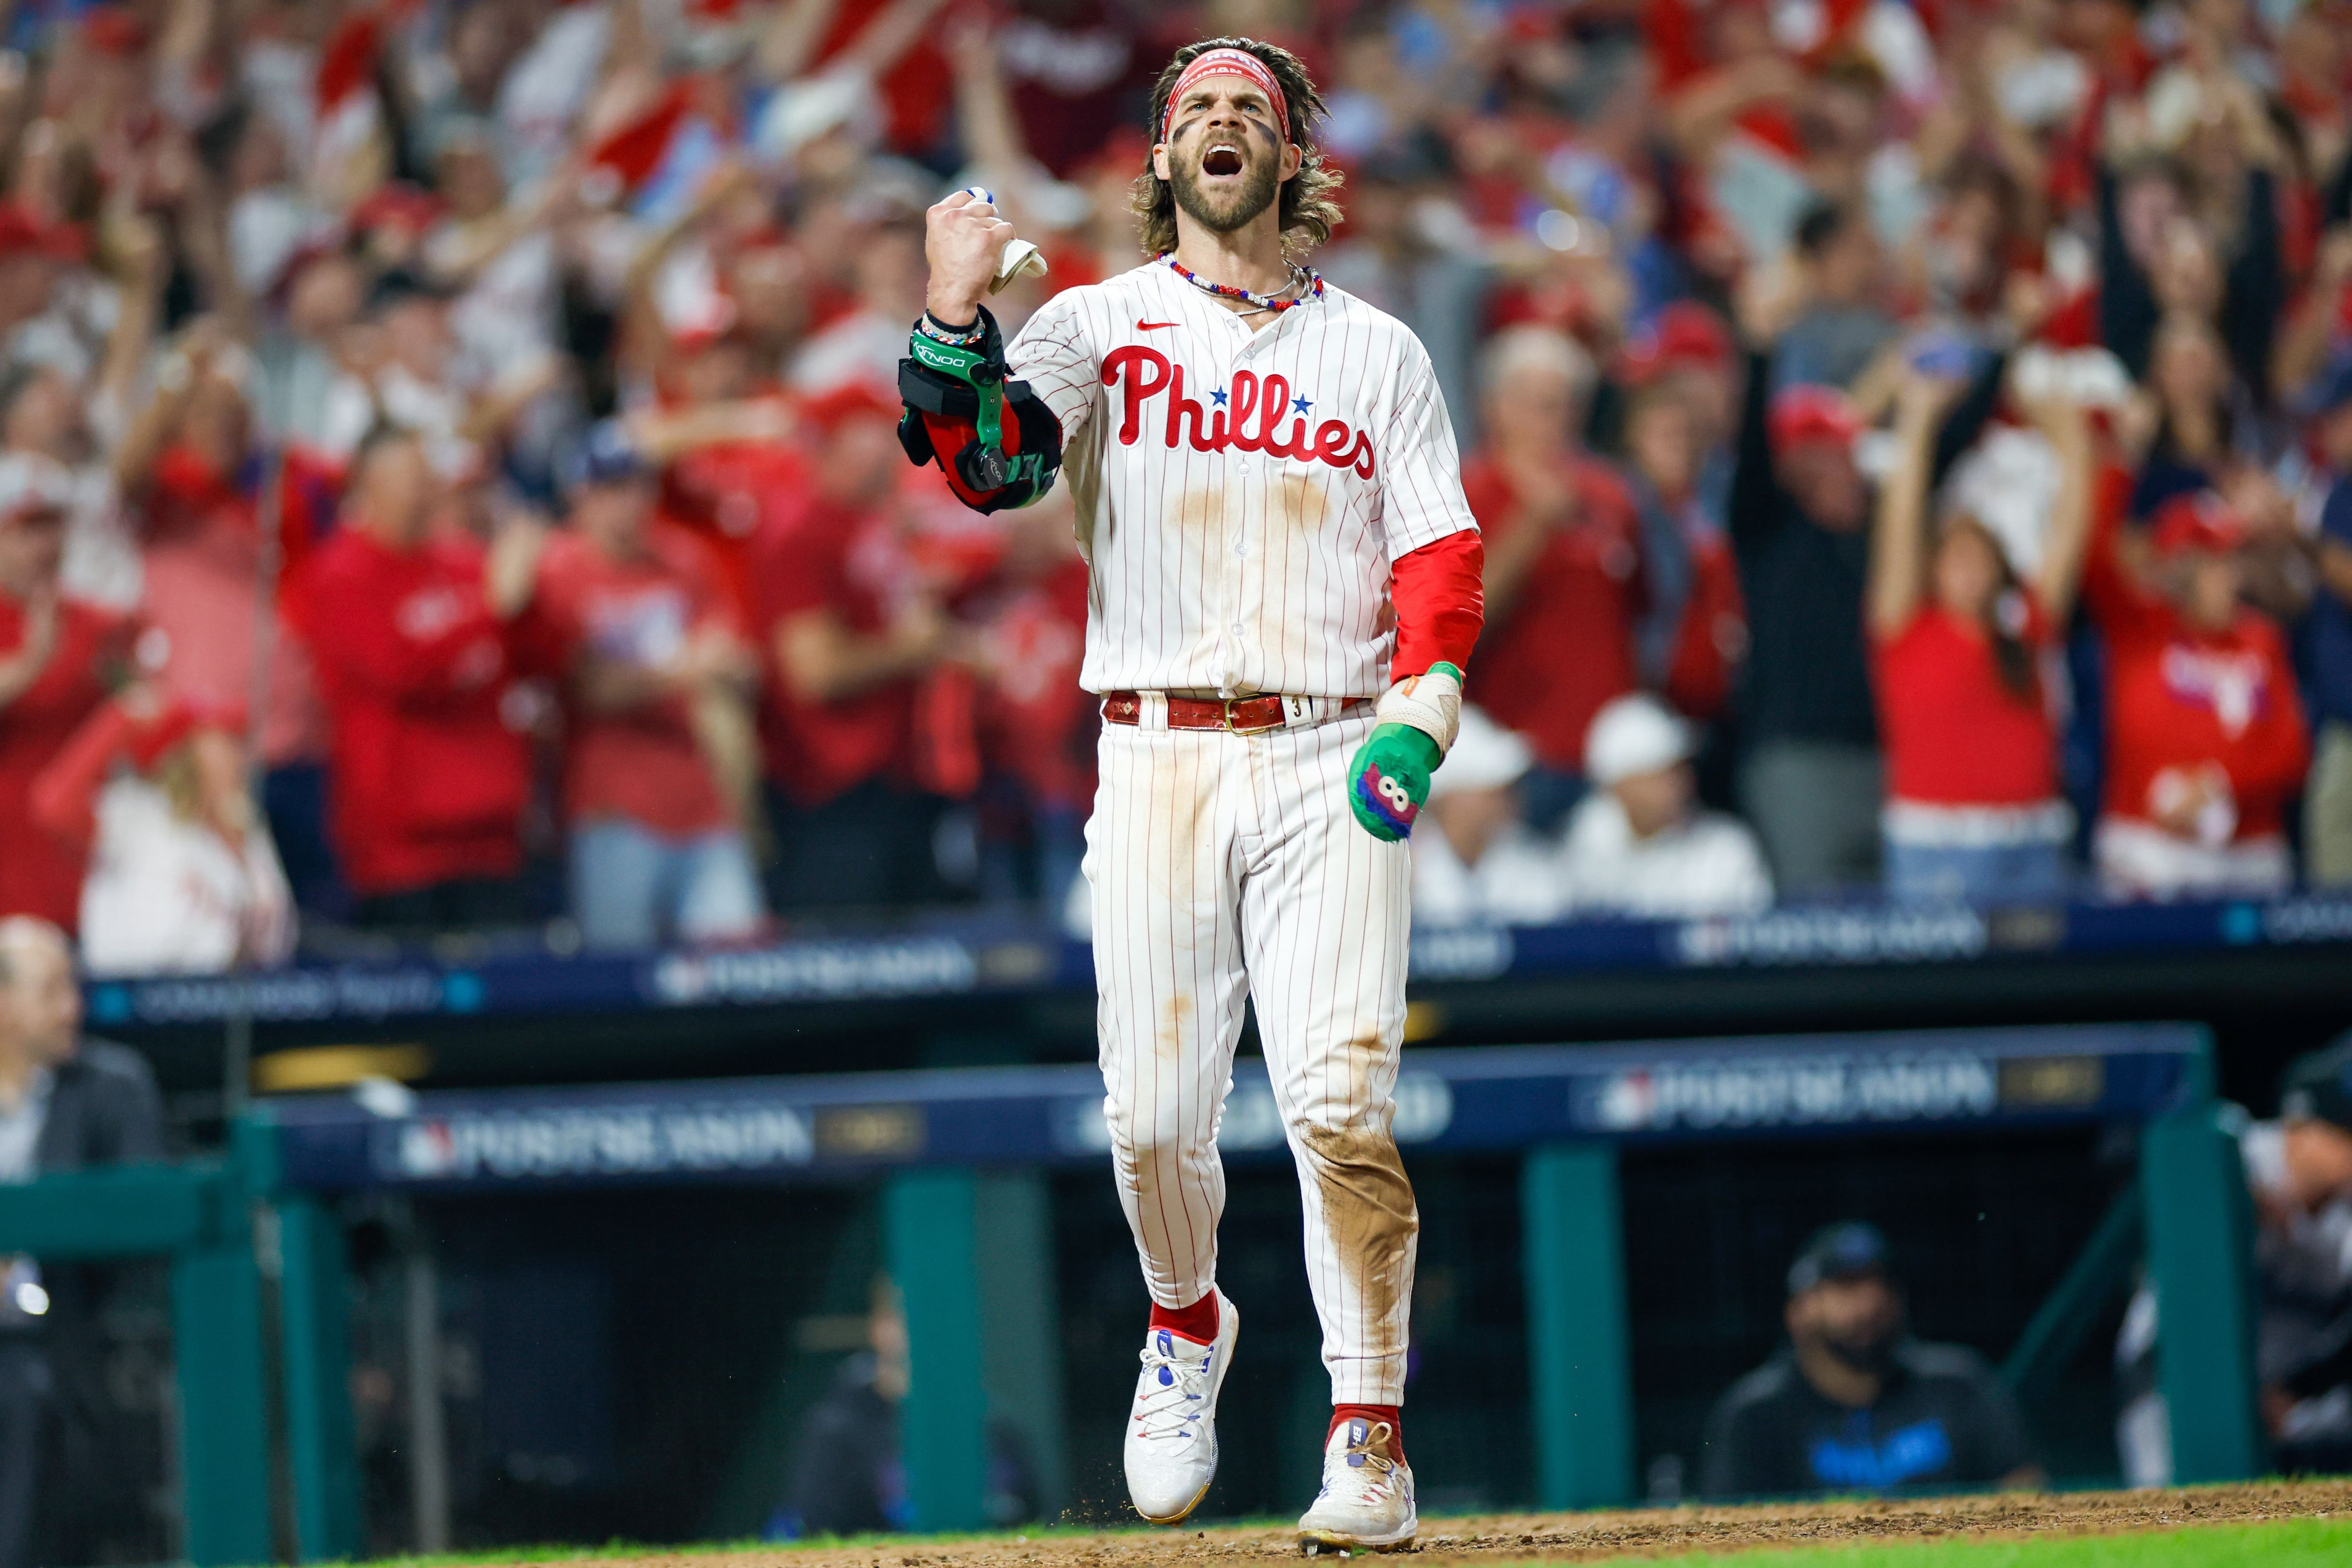 PHILADELPHIA, PA - SEPTEMBER 27: Philadelphia Phillies Outfield Bryce Harper  (3) squats frustrated at first base after being tagged out during the Miami  Marlins game versus the Philadelphia Phillies on September 27